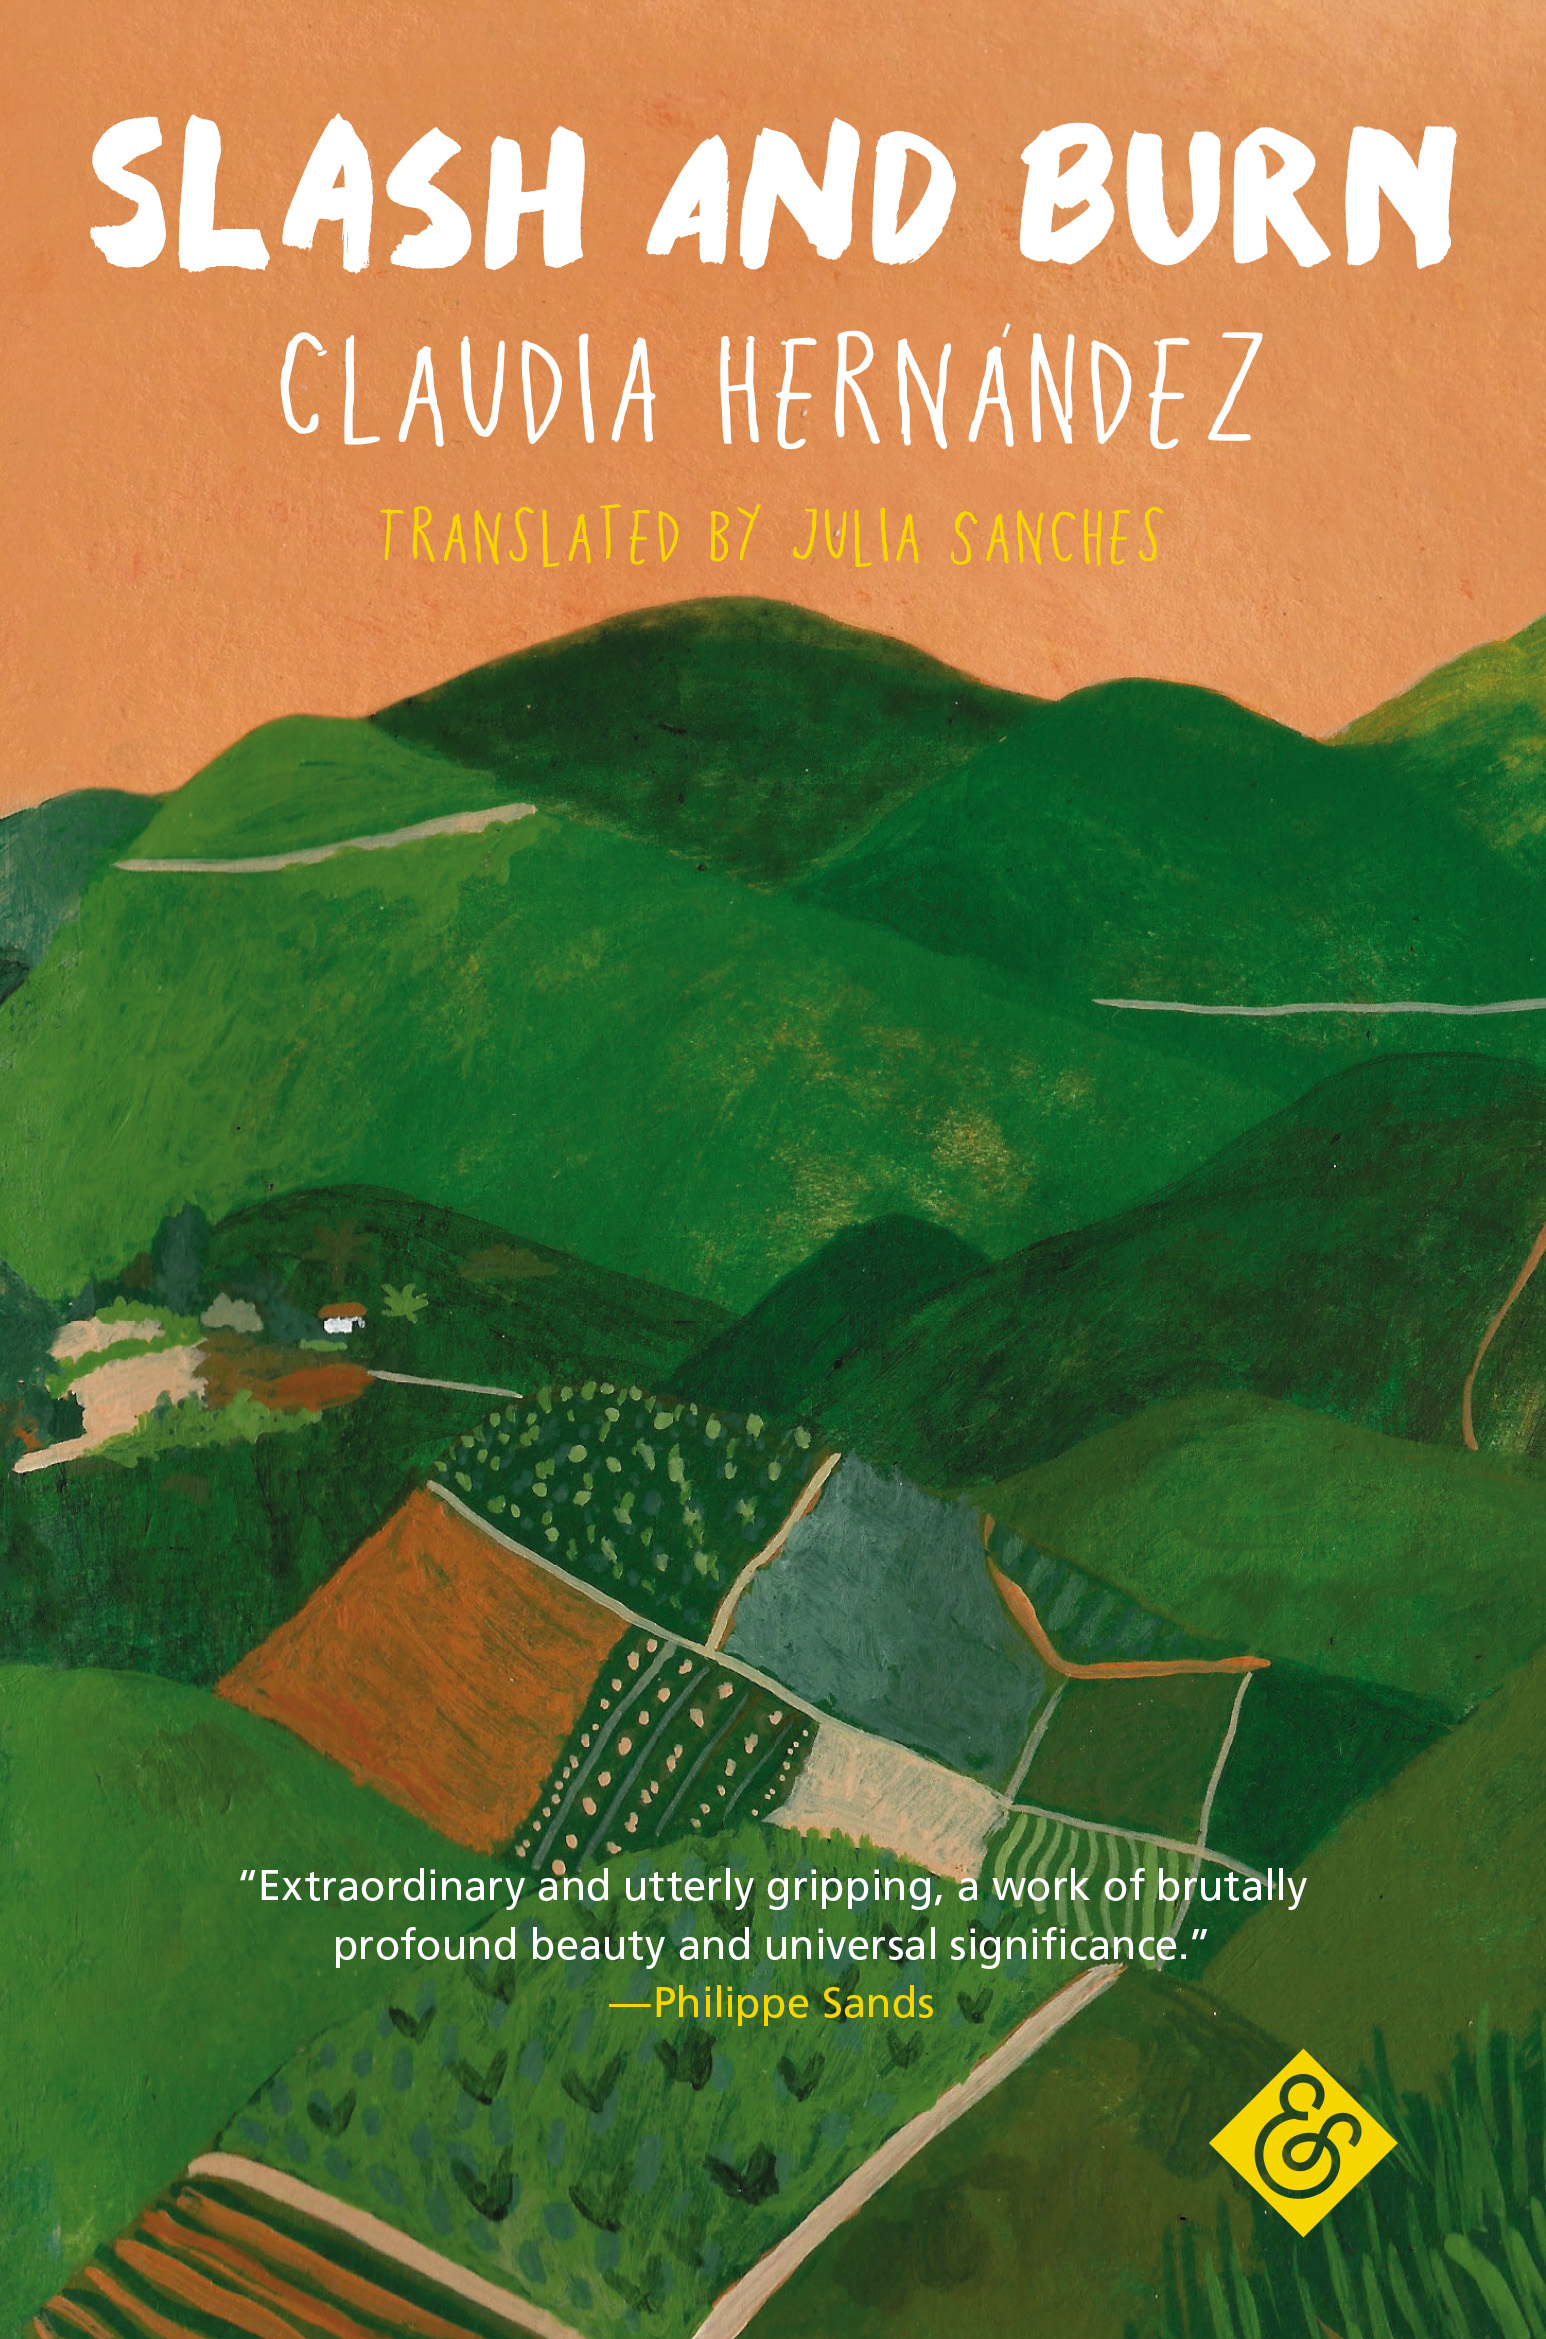 The Grammar of Emotions | A Conversation with Claudia Hernández